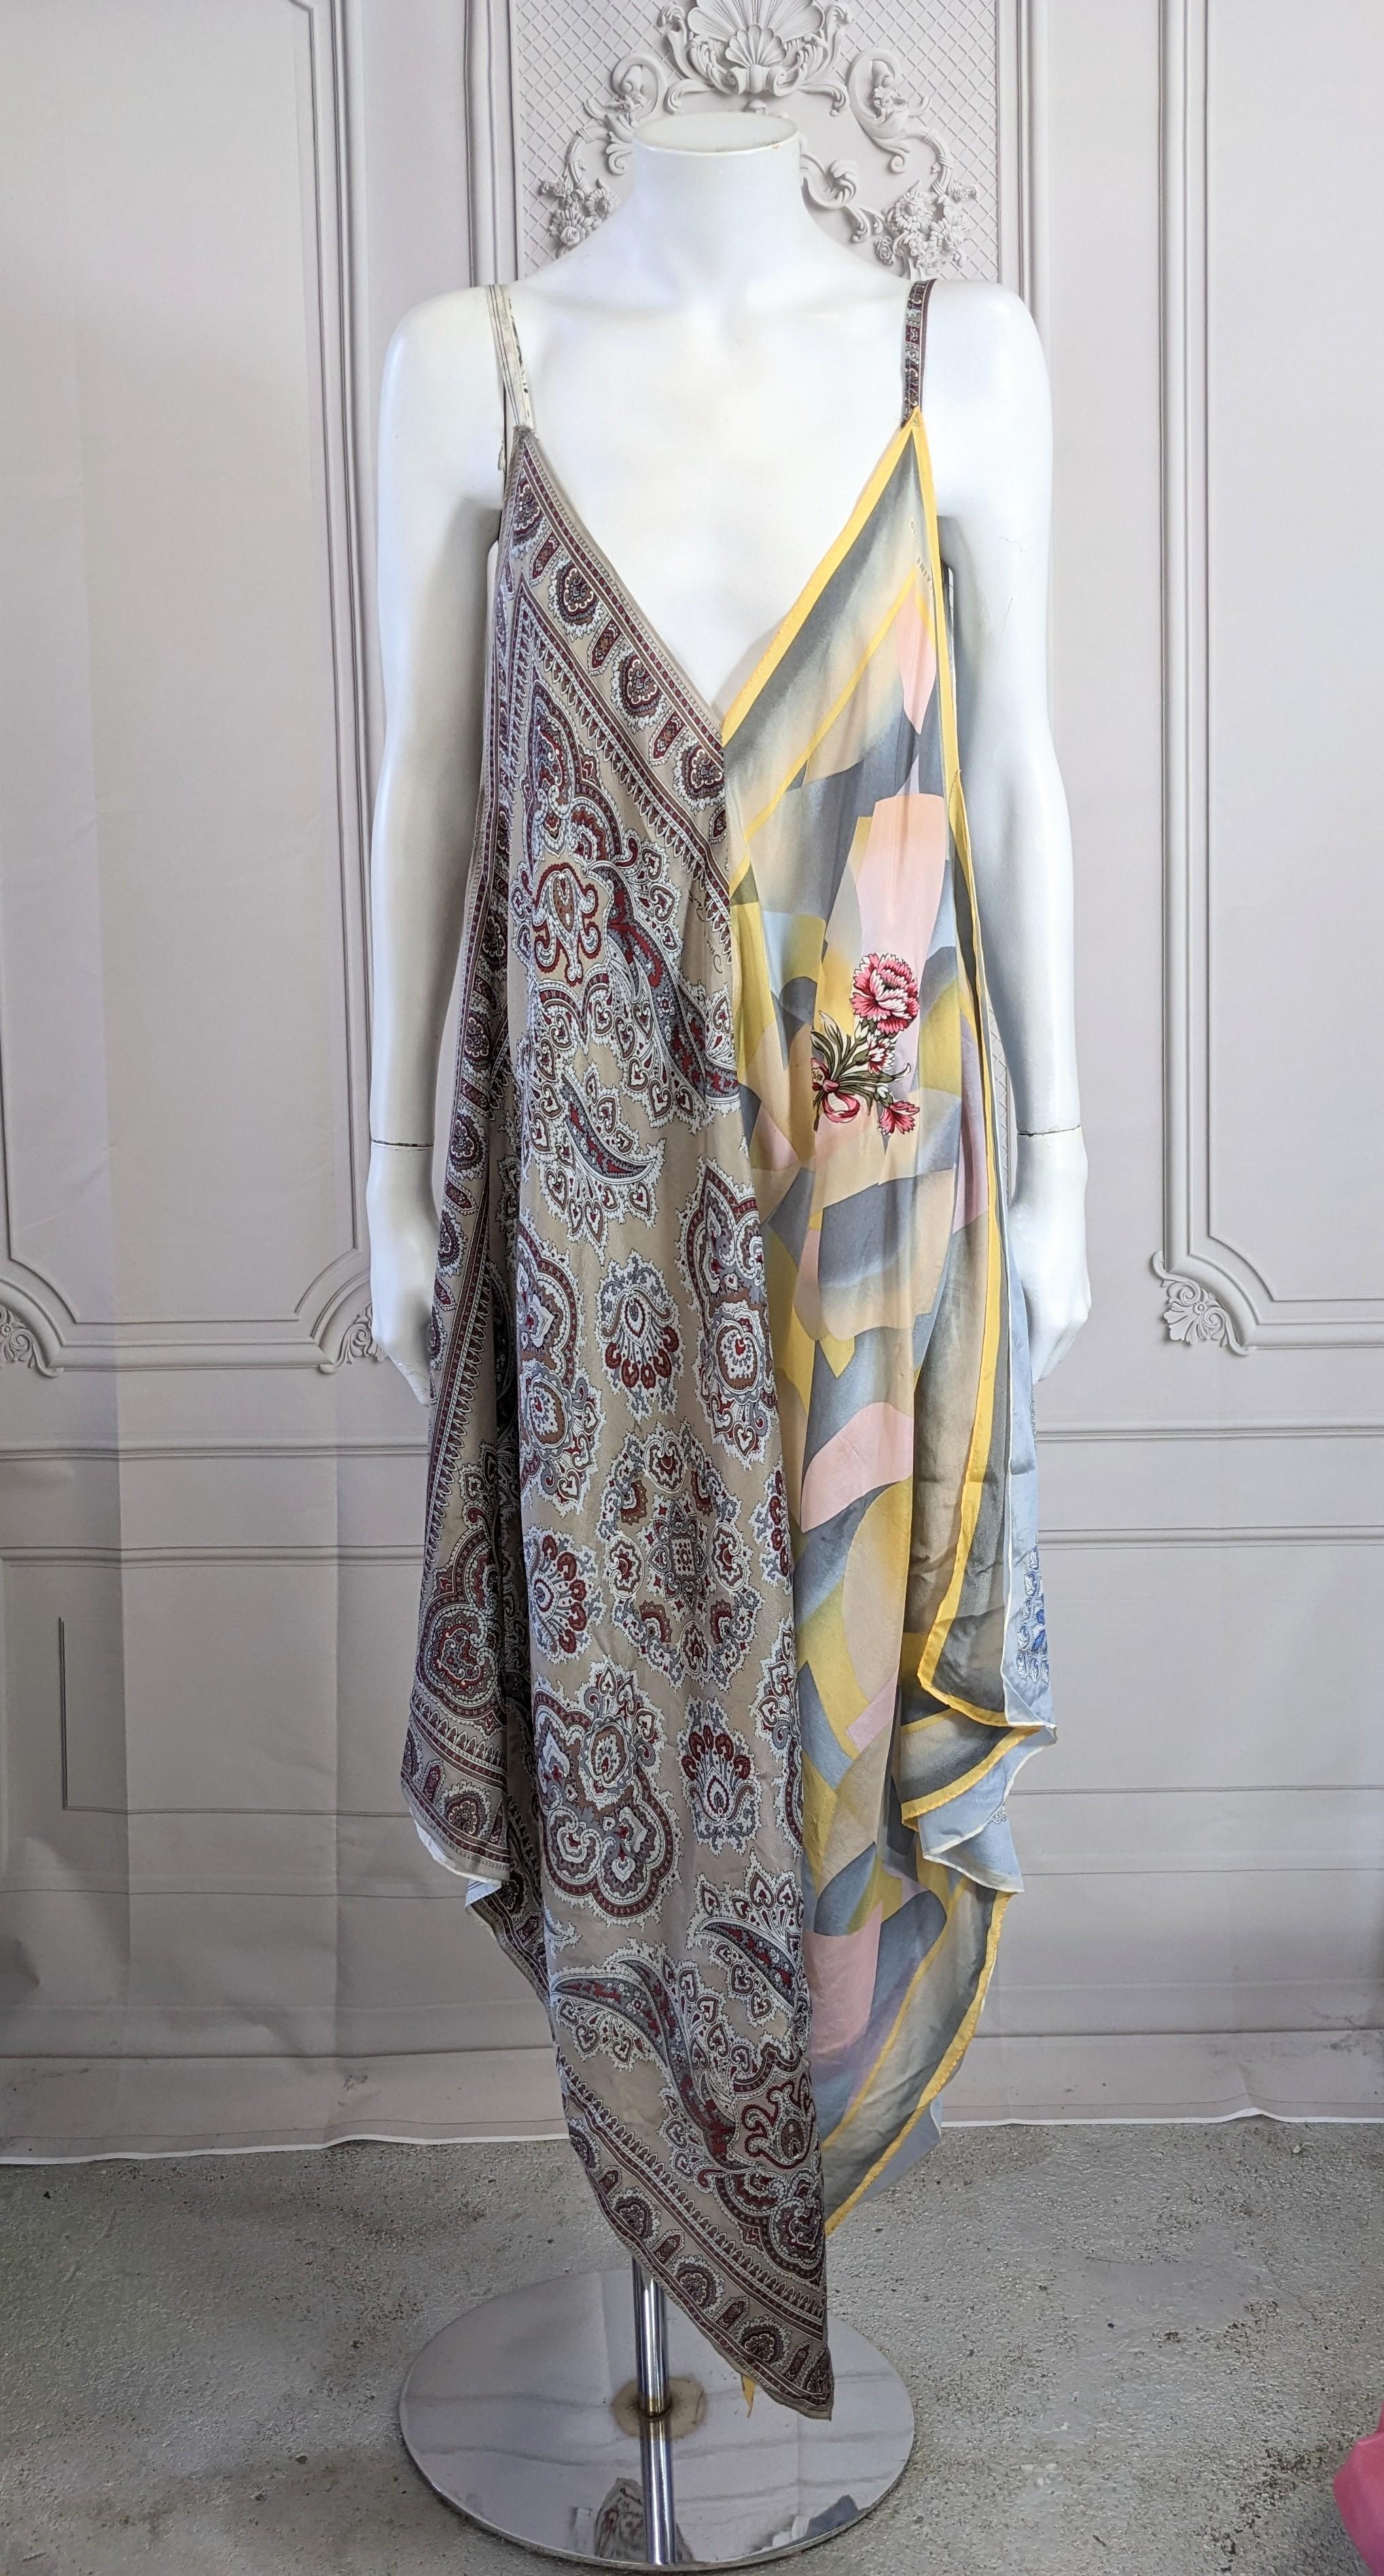 Silk Scarf Point Dress by accessories designer Elaine Gold circa 1990's. Made of 4 silk scarves, some of which appear to be vintage. Her signature is printed on the edge of one point and floral appliques cut from one scarf are added to the front. 